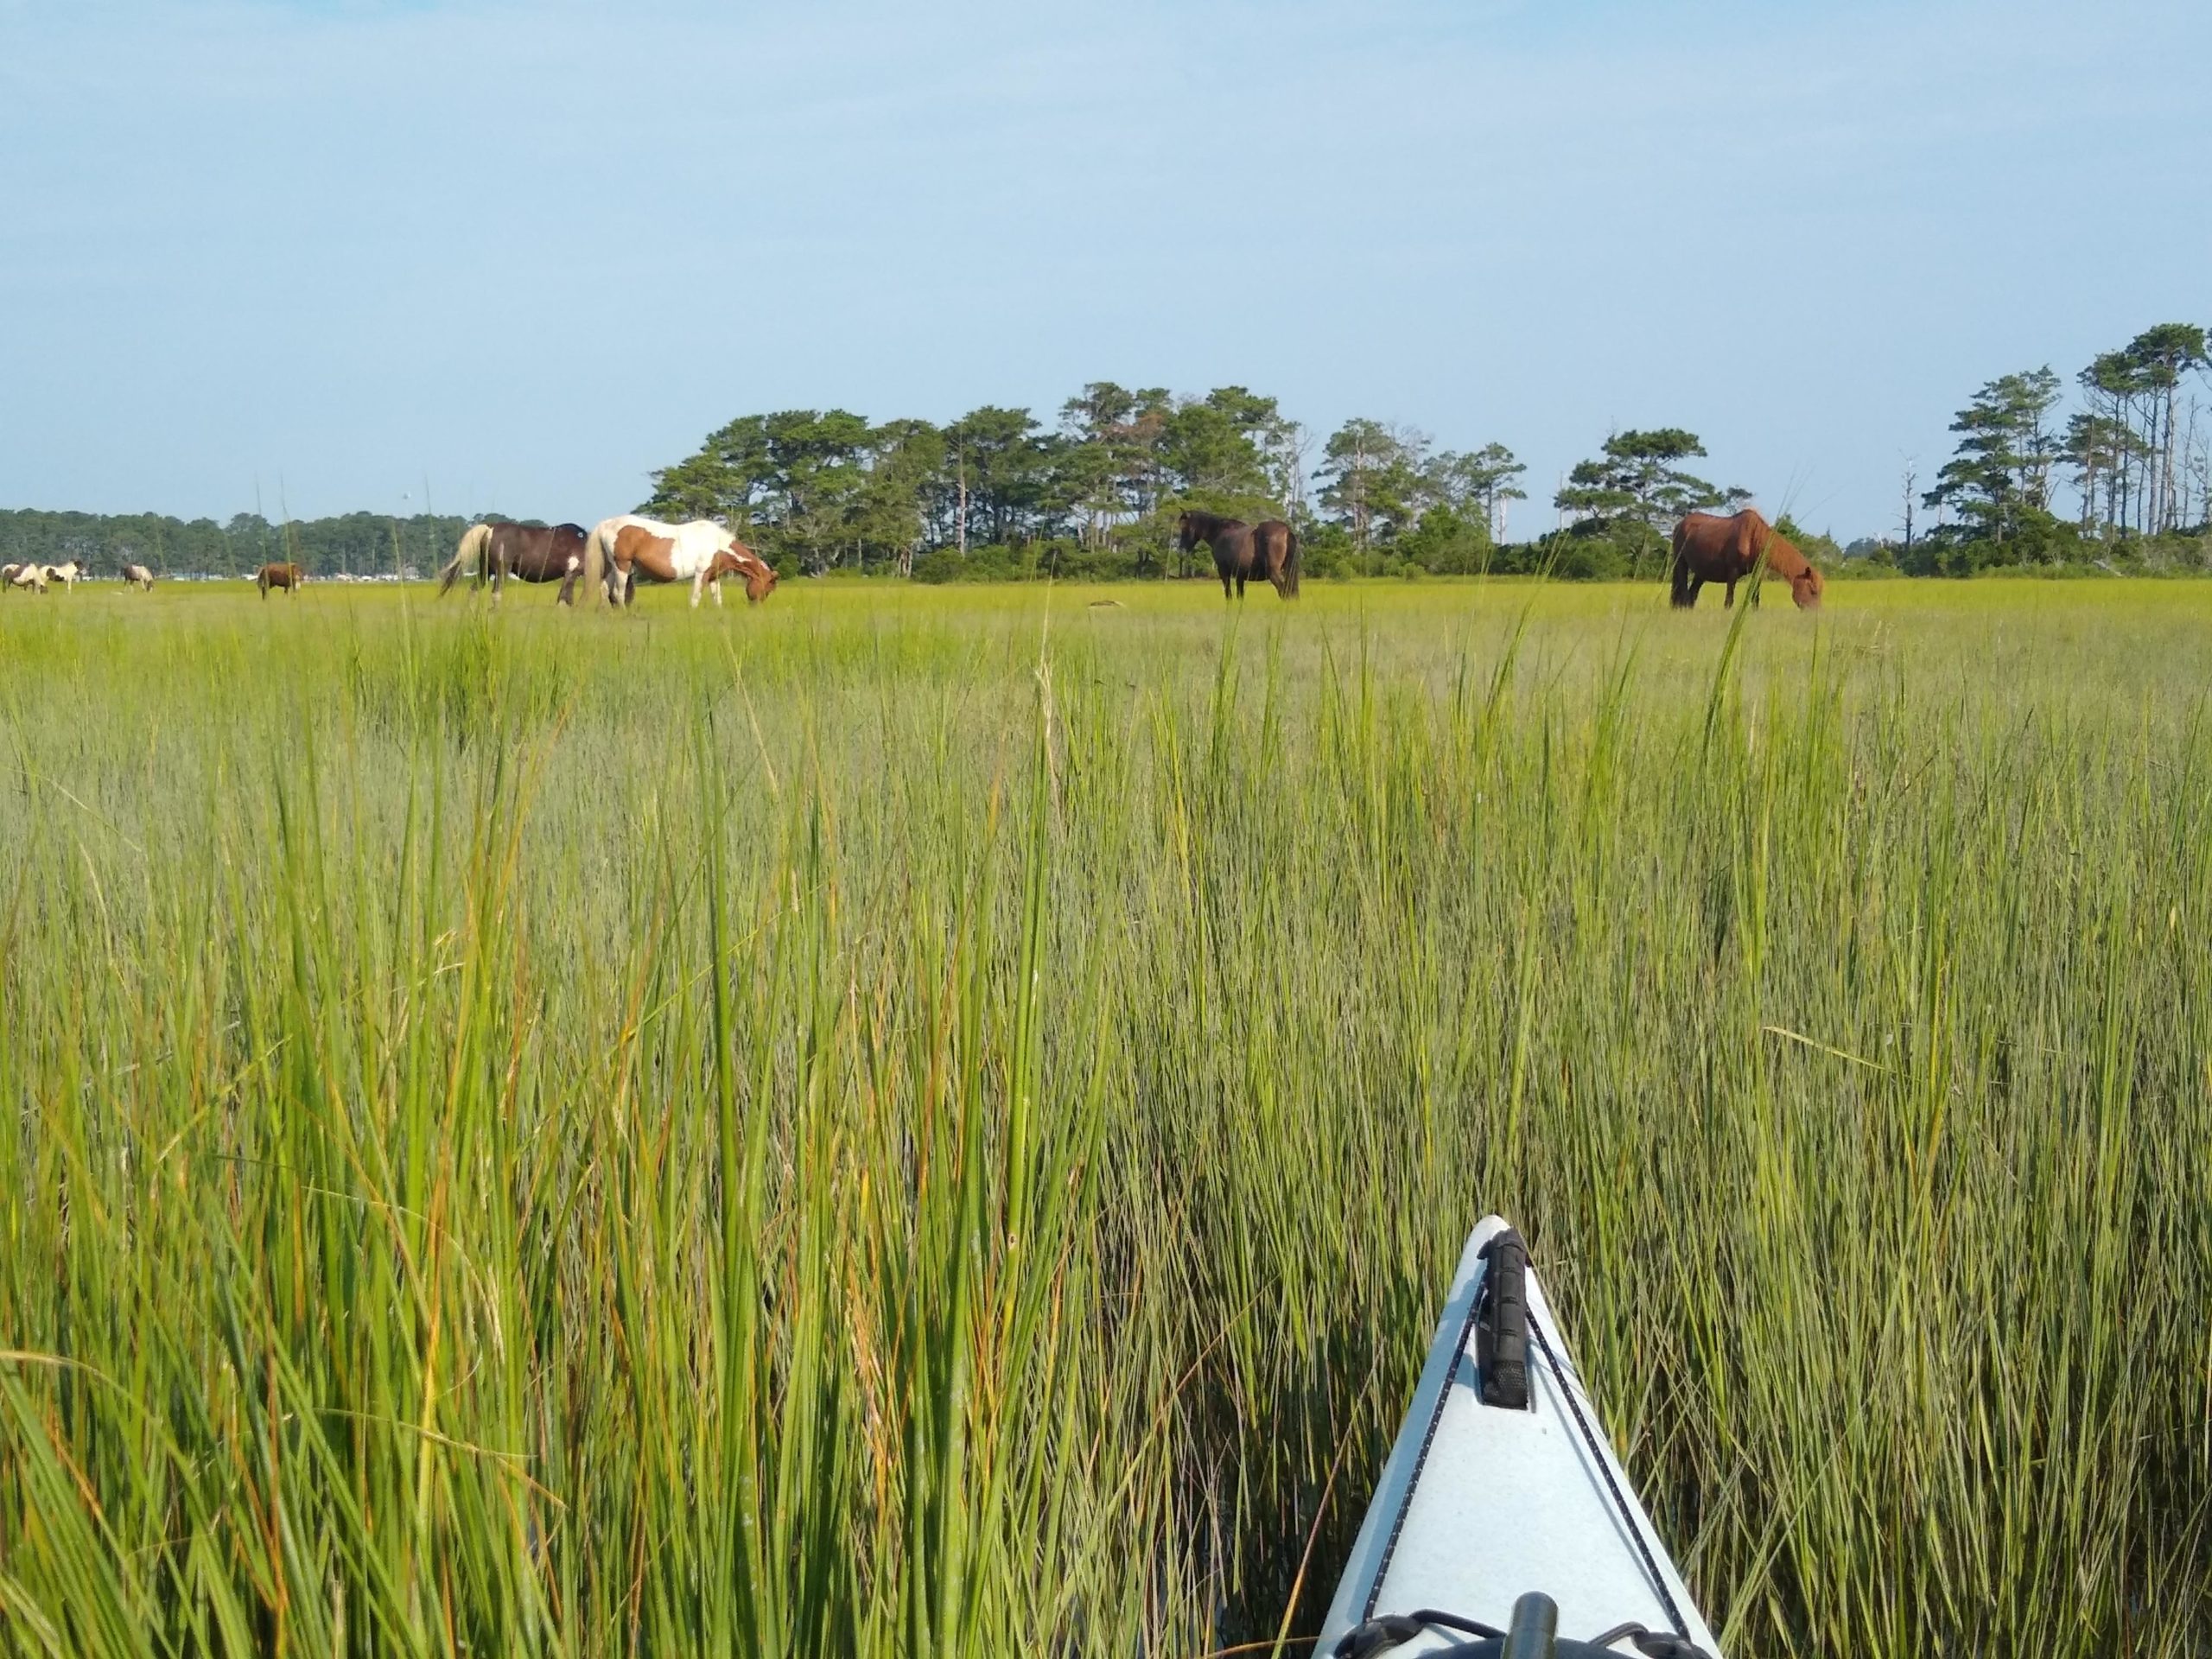 kayak in the foreground, ponies in the distance grazing in the marsh grasses